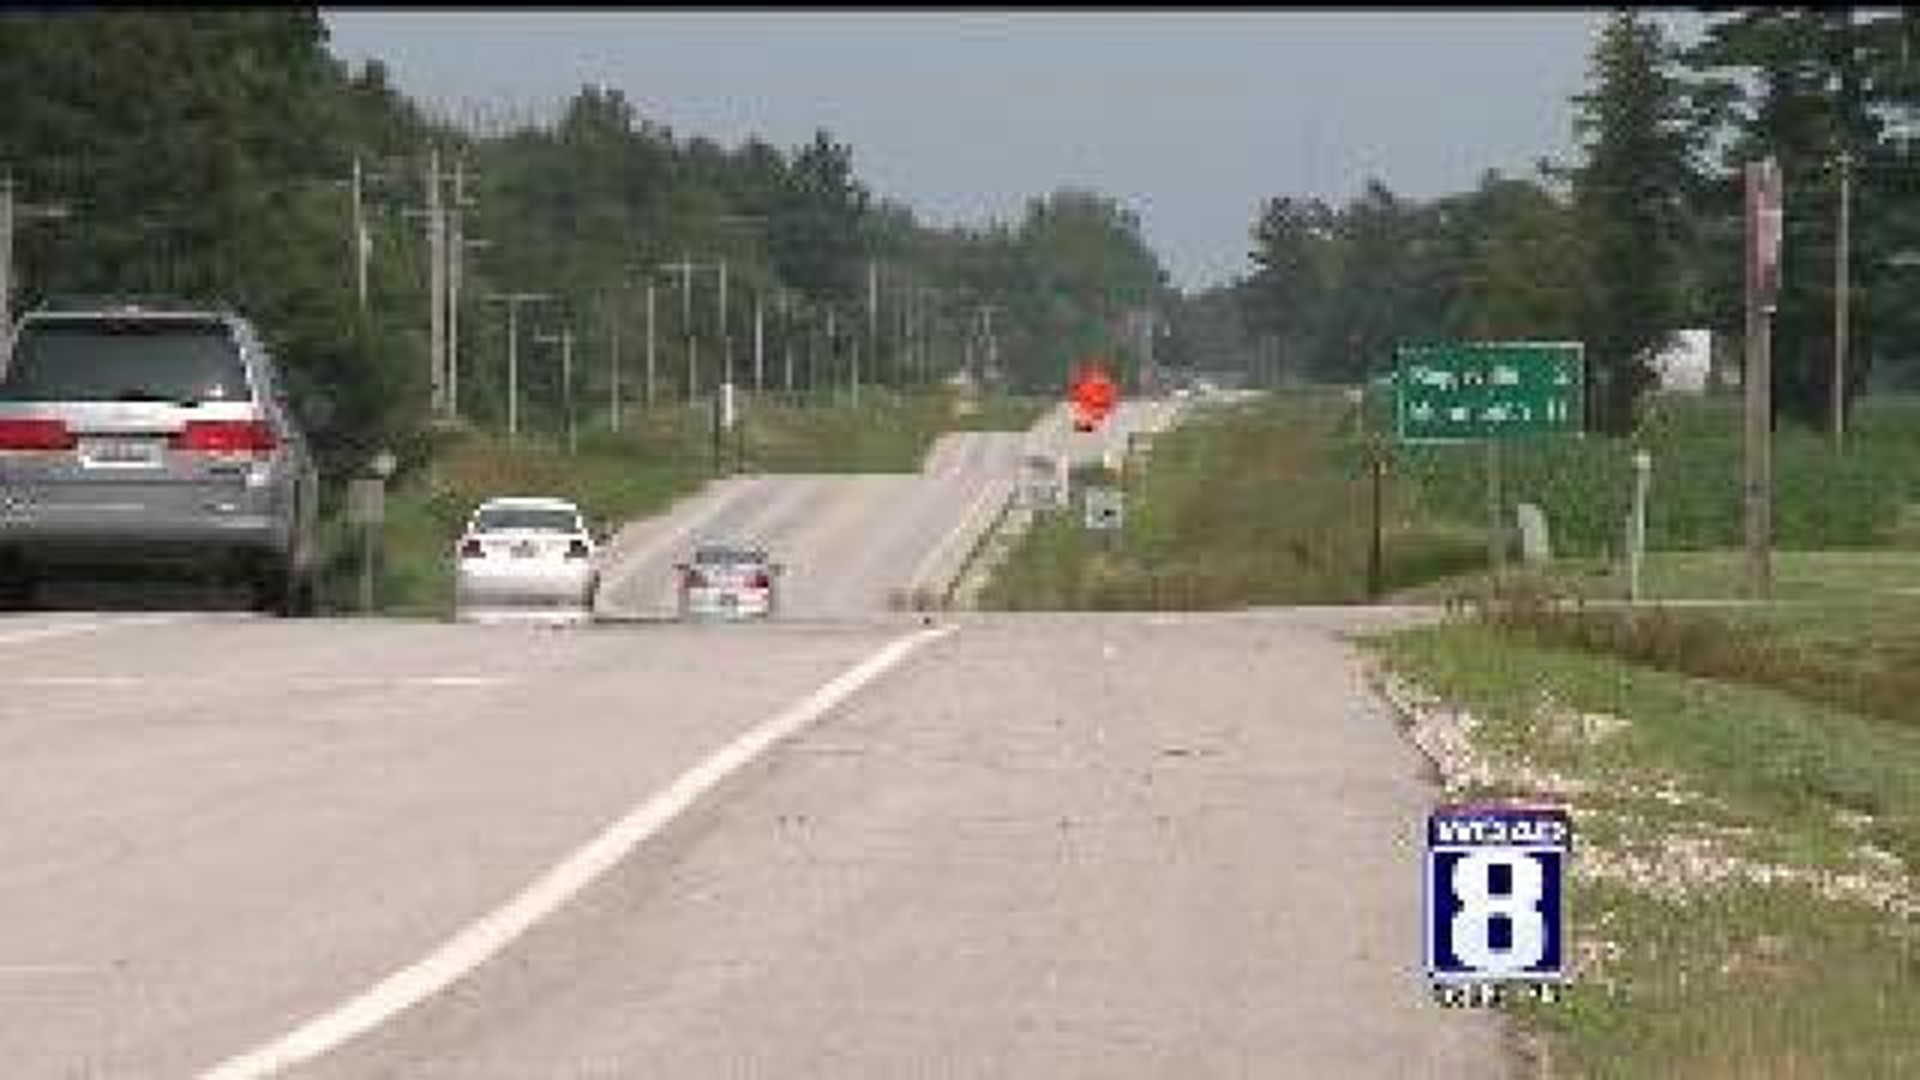 Construction to create 4-lane expressway on US-34